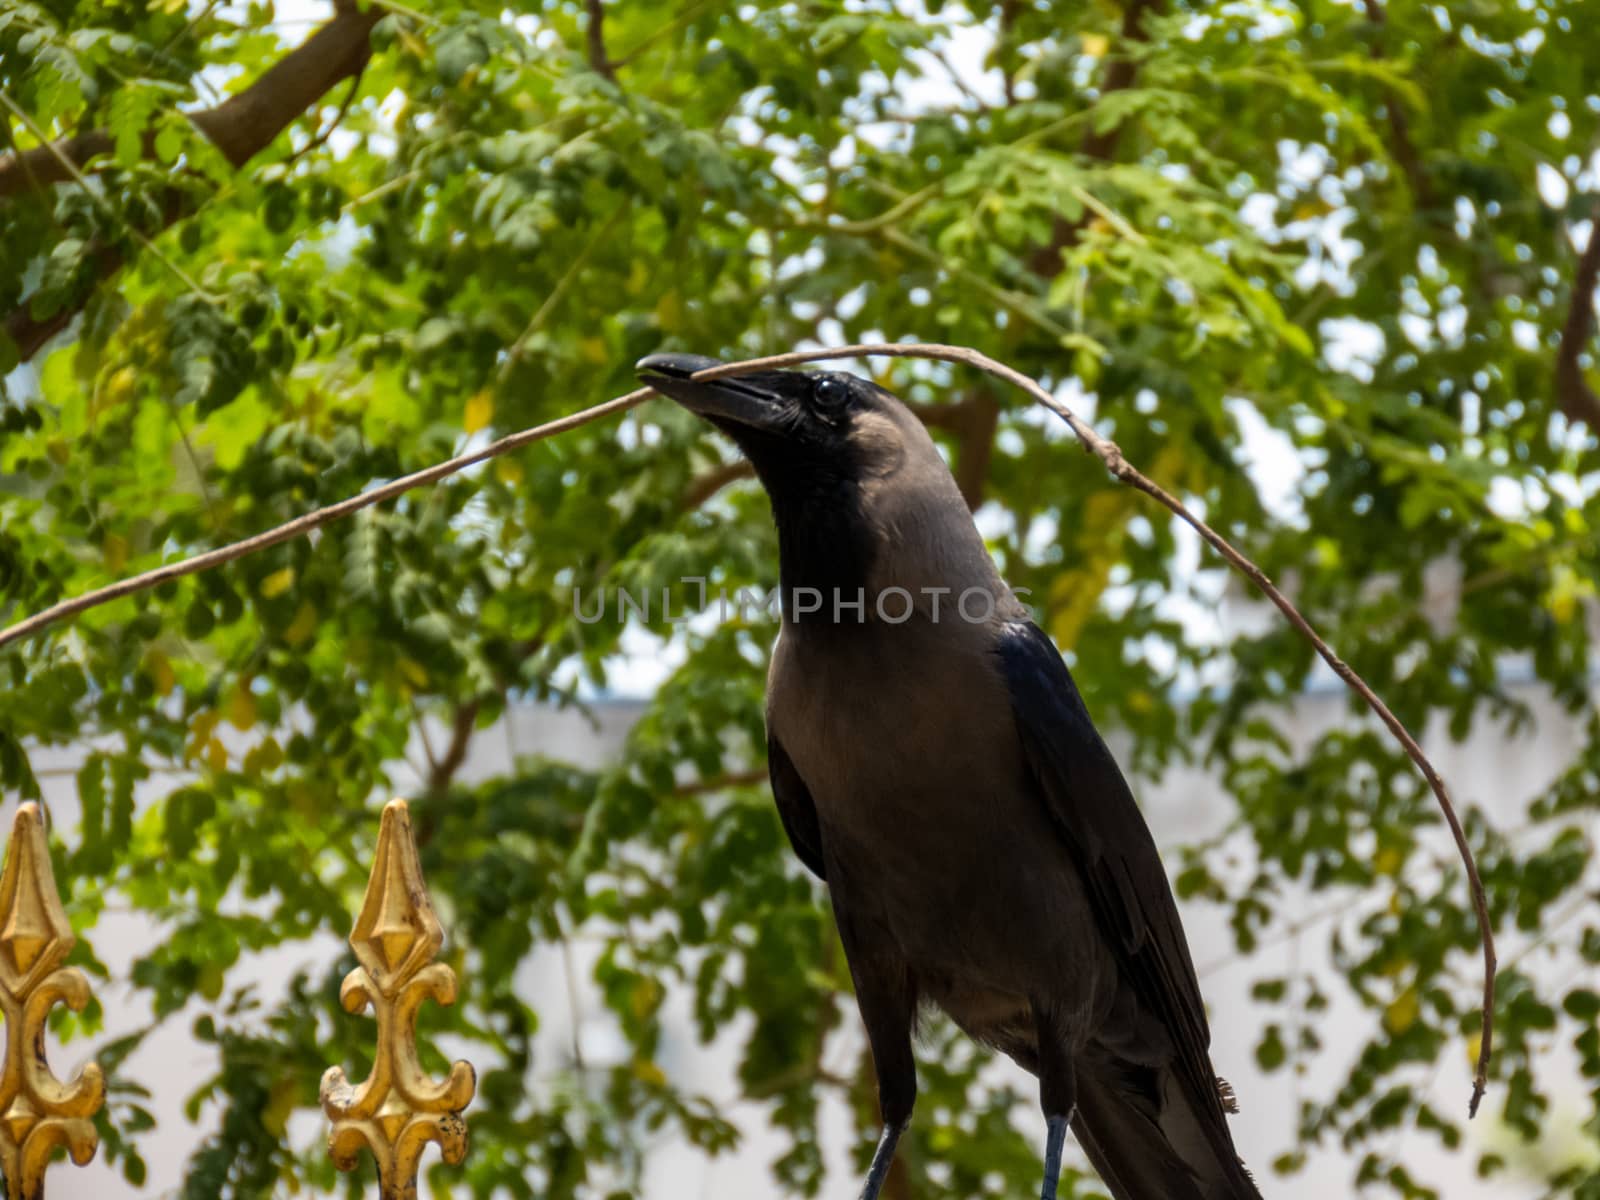 A crow is taking a straw to build its nest